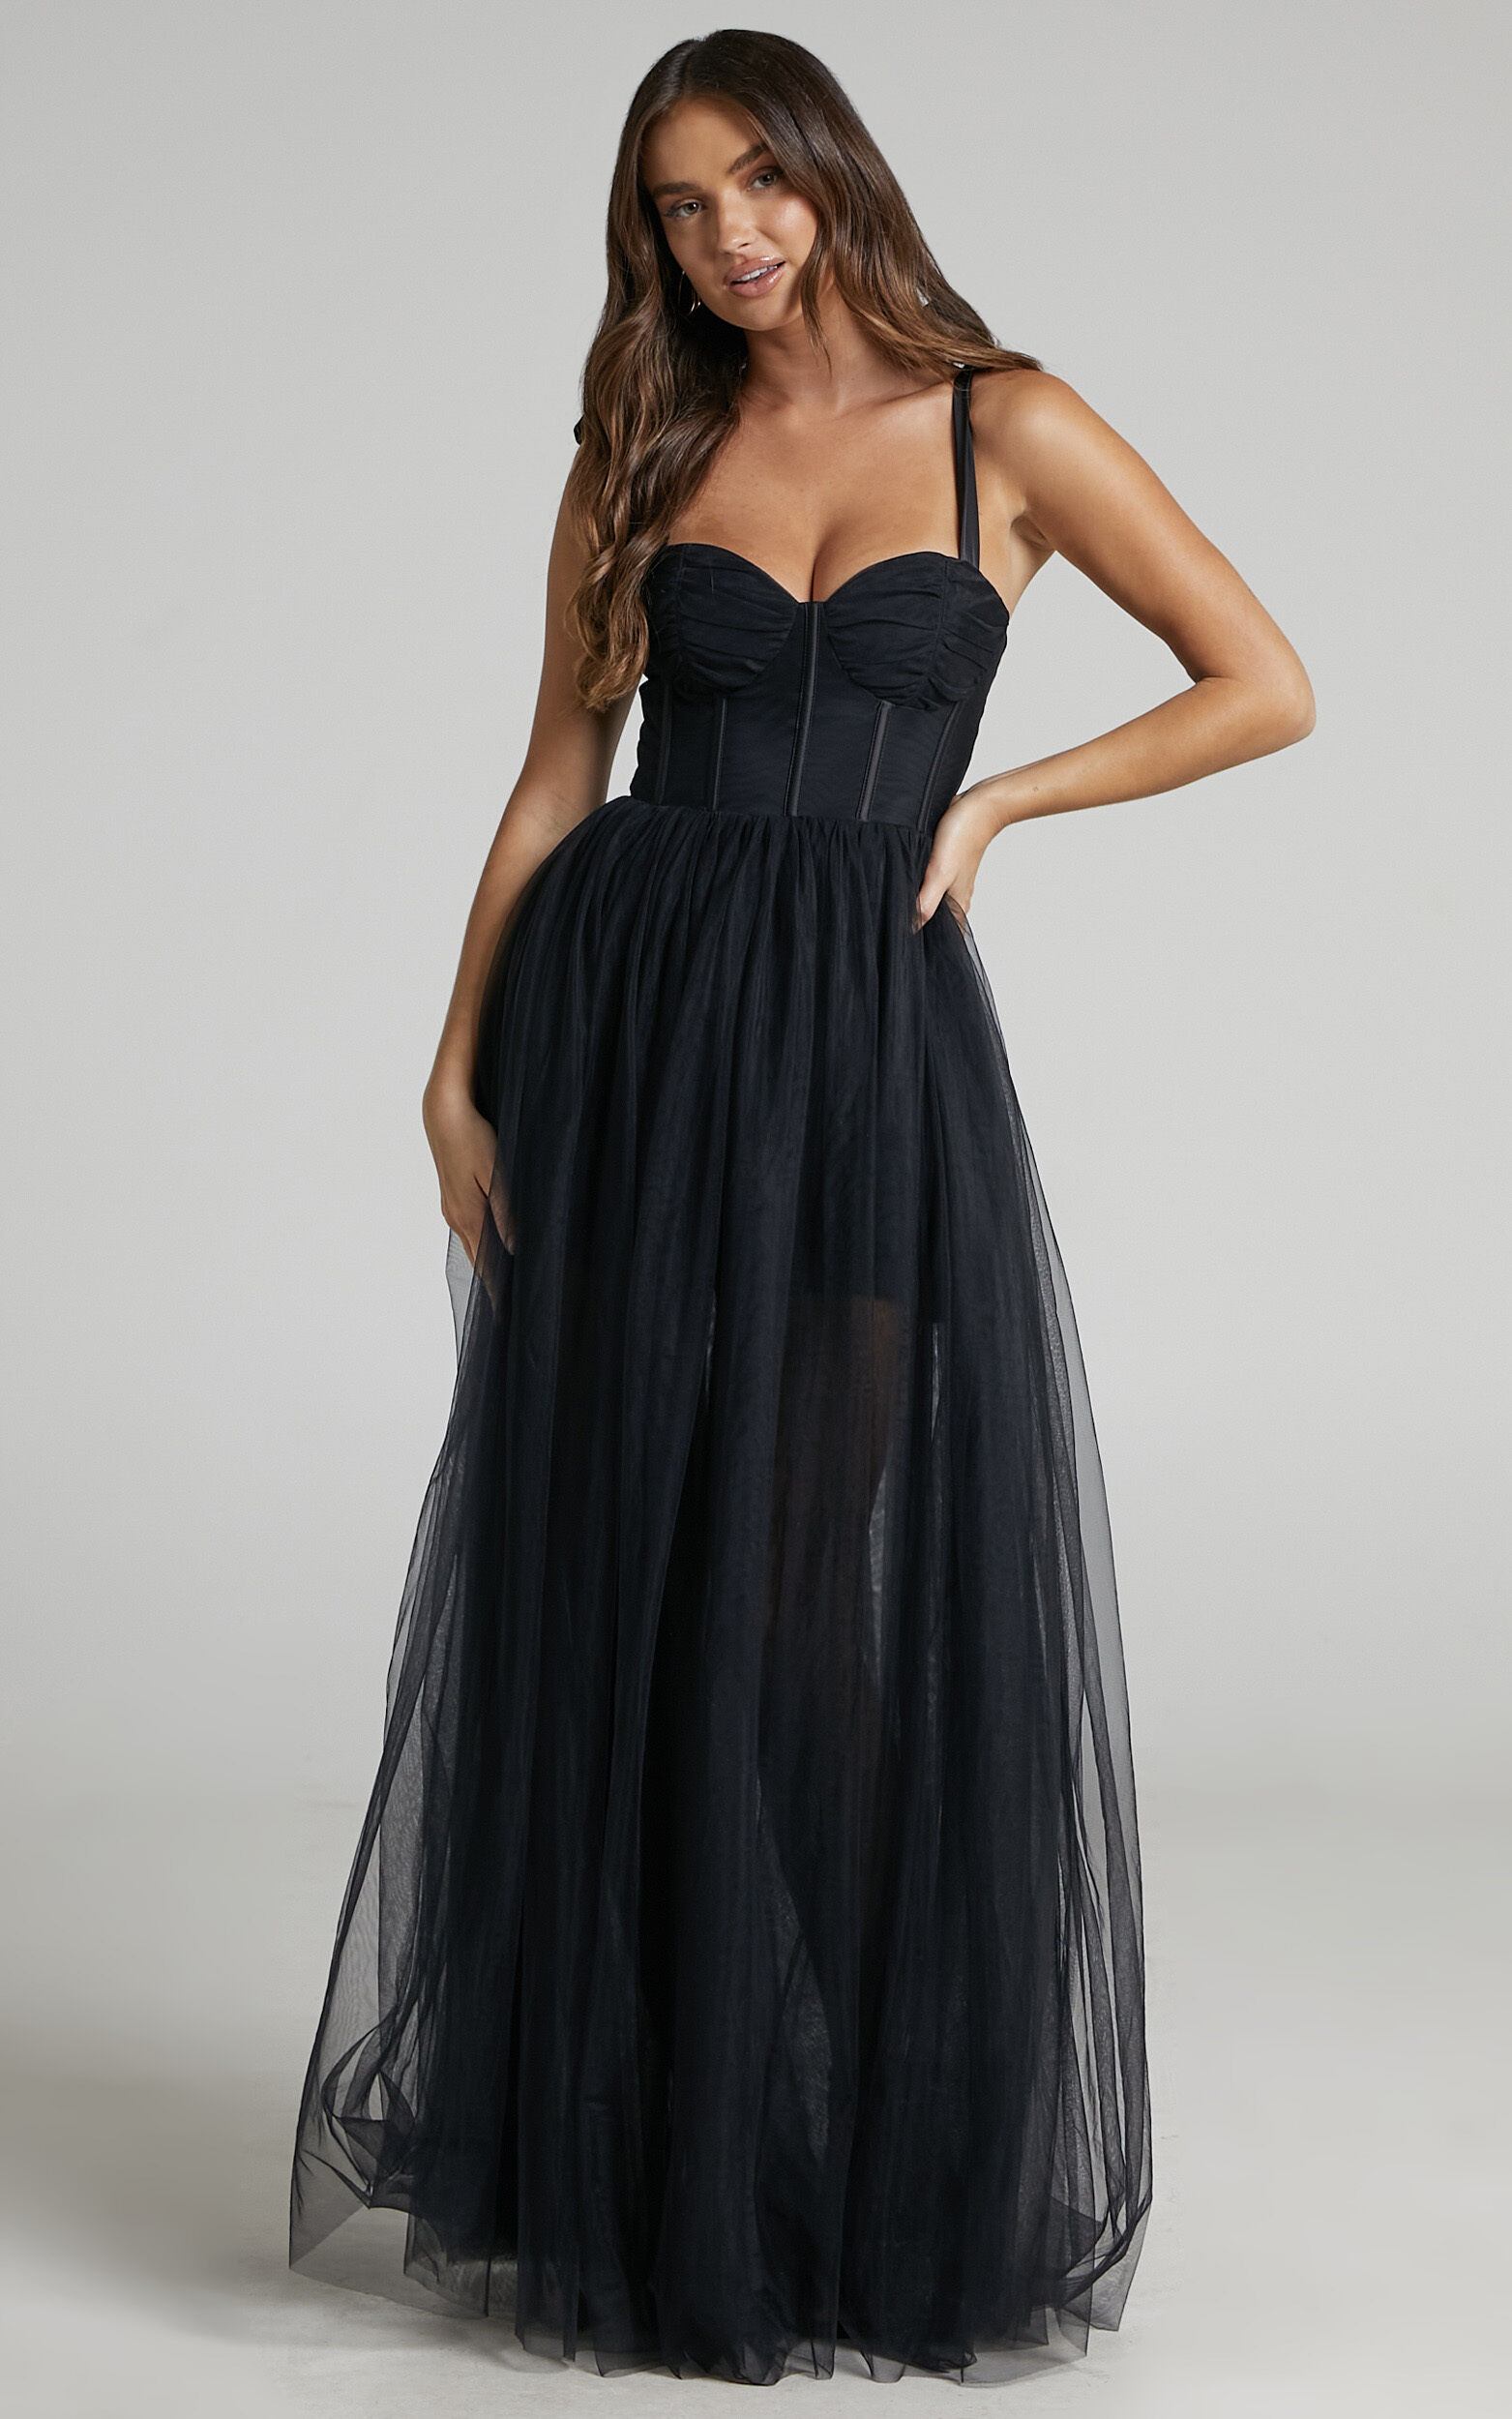 Emmary Bustier Bodice Tulle Gown in Black | Showpo